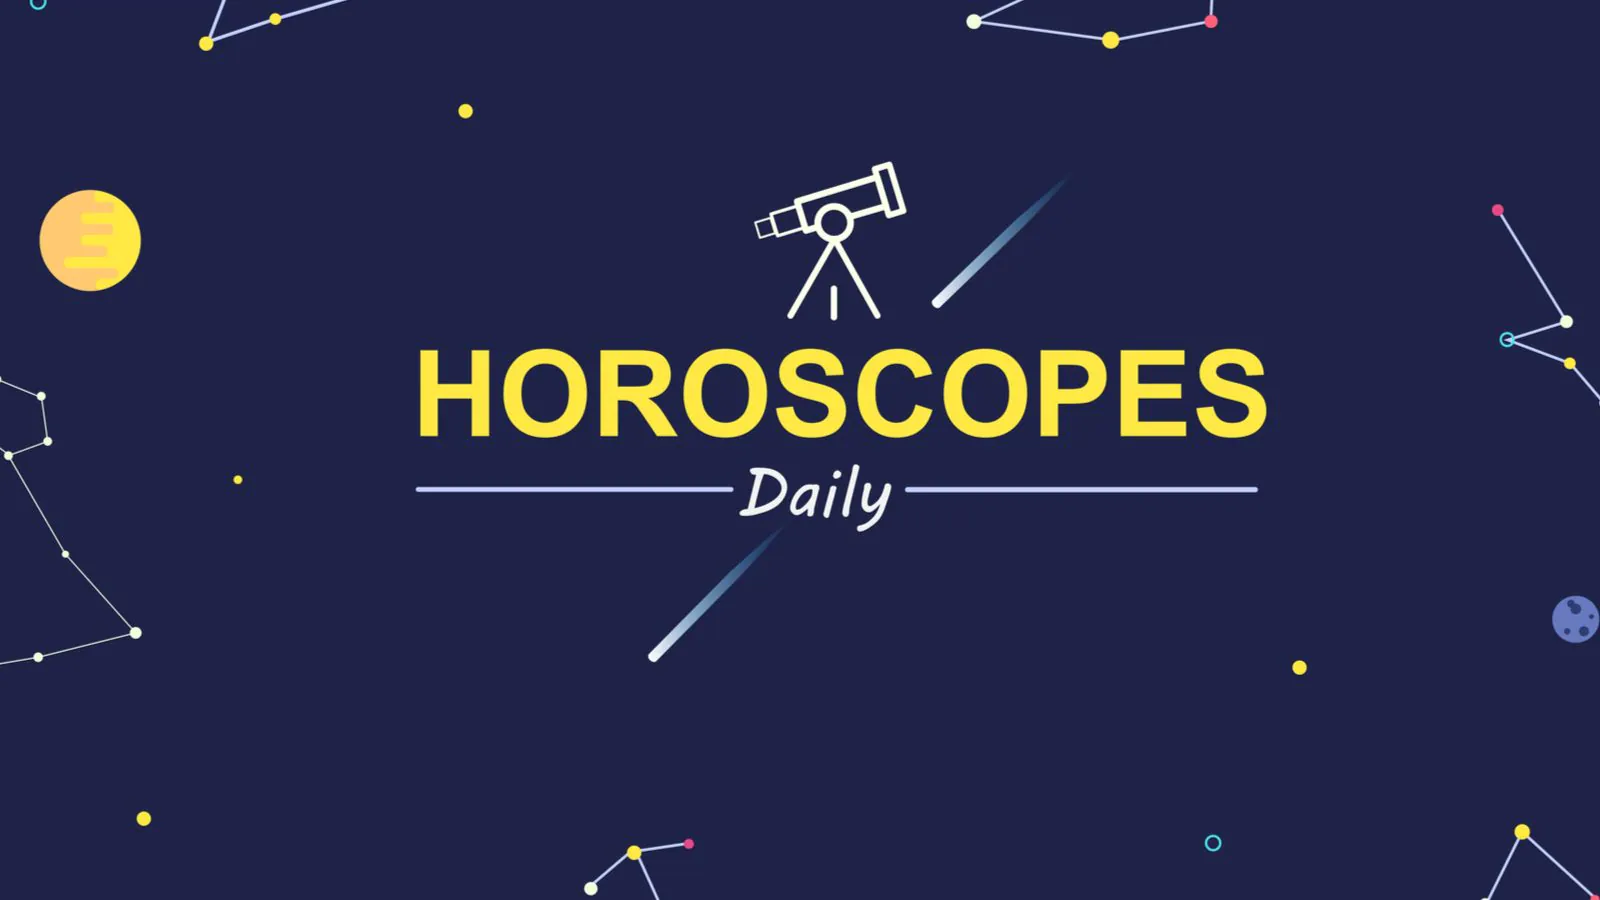 Check Out Daily Astrological Prediction for Aries, Taurus, Libra, Sagittarius And Other Zodiac Signs on Monday